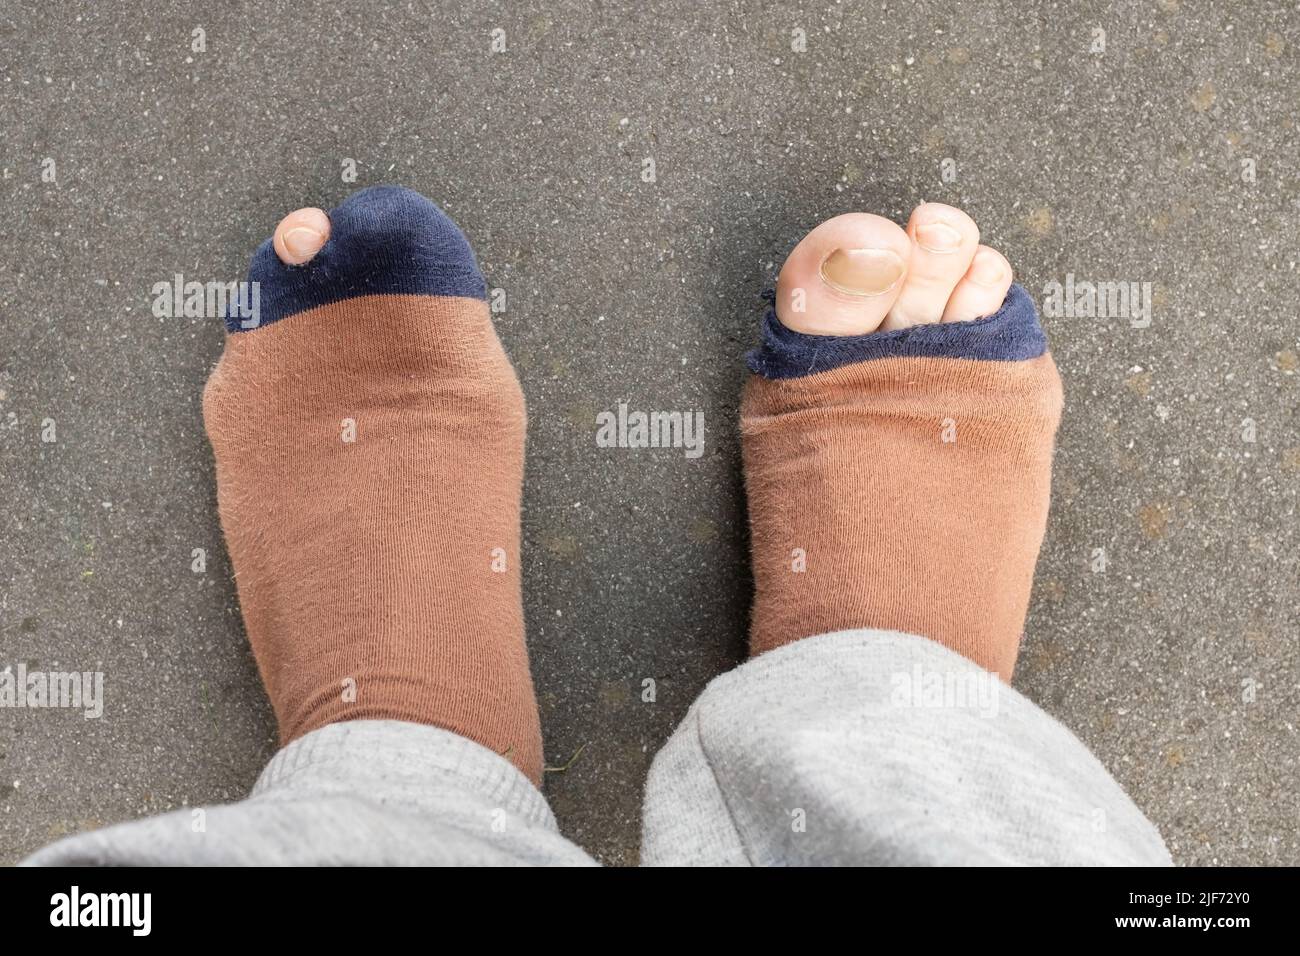 https://c8.alamy.com/comp/2JF72Y0/male-legs-with-protruding-toes-in-holey-worn-socks-on-a-gray-floor-top-view-2JF72Y0.jpg